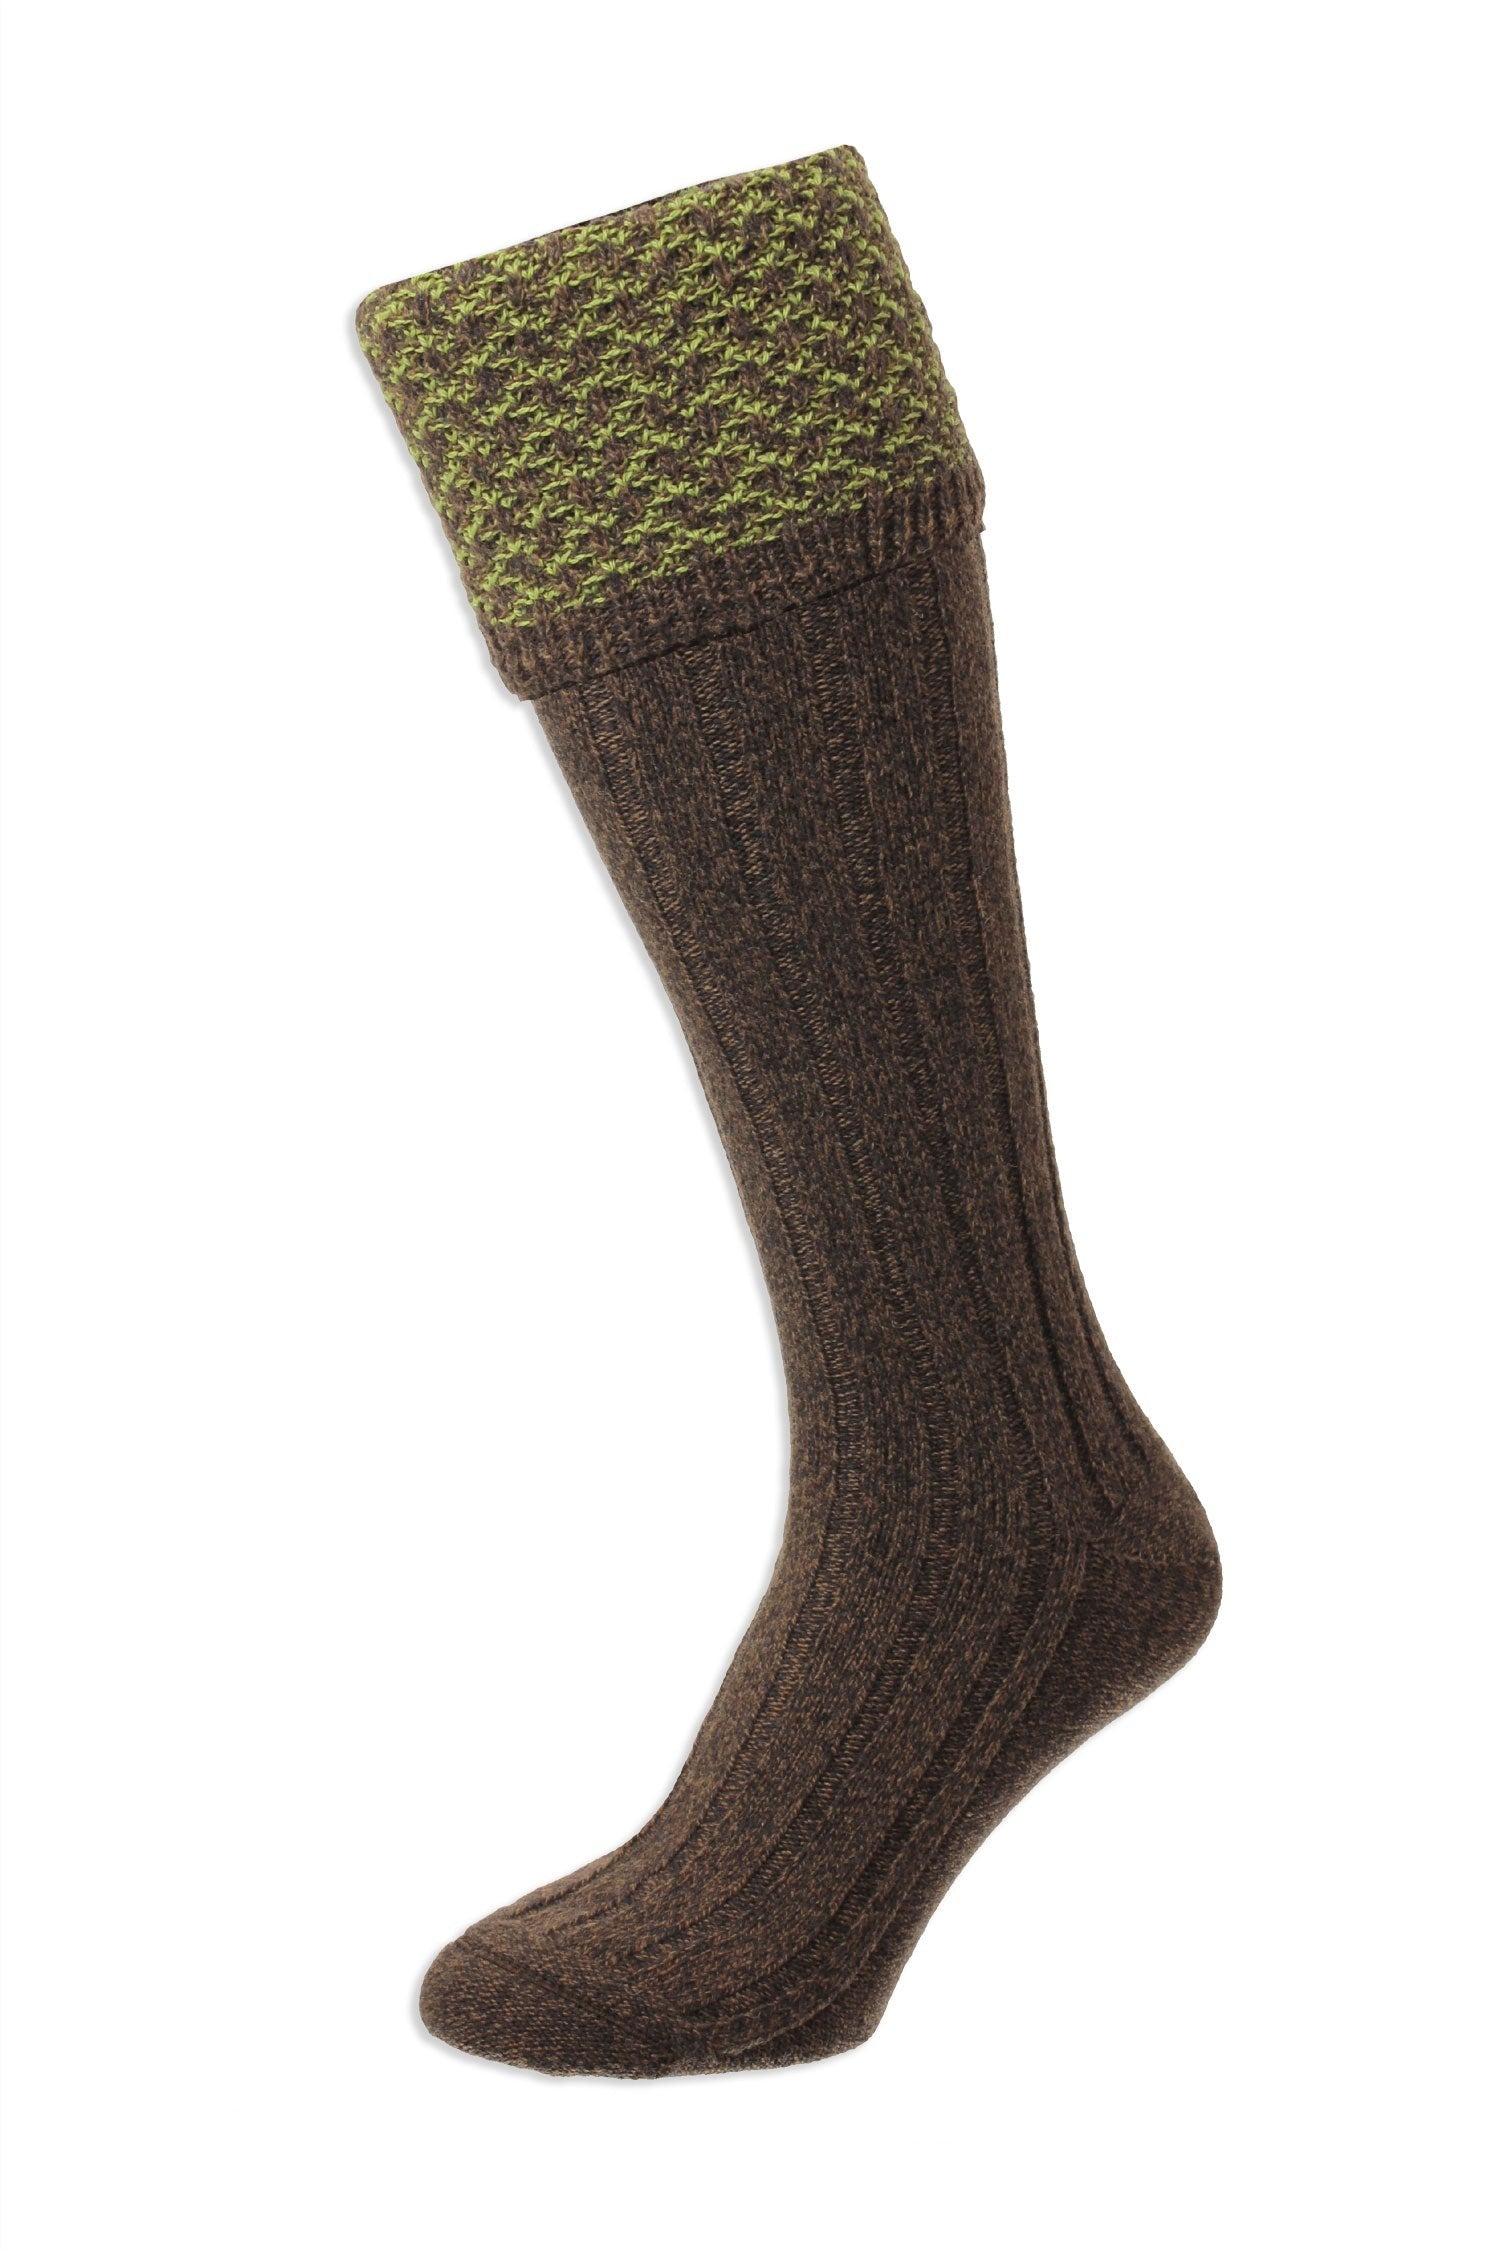 Forest Marl Honeycomb Textured Top Shooting Sock by HJ Hall 